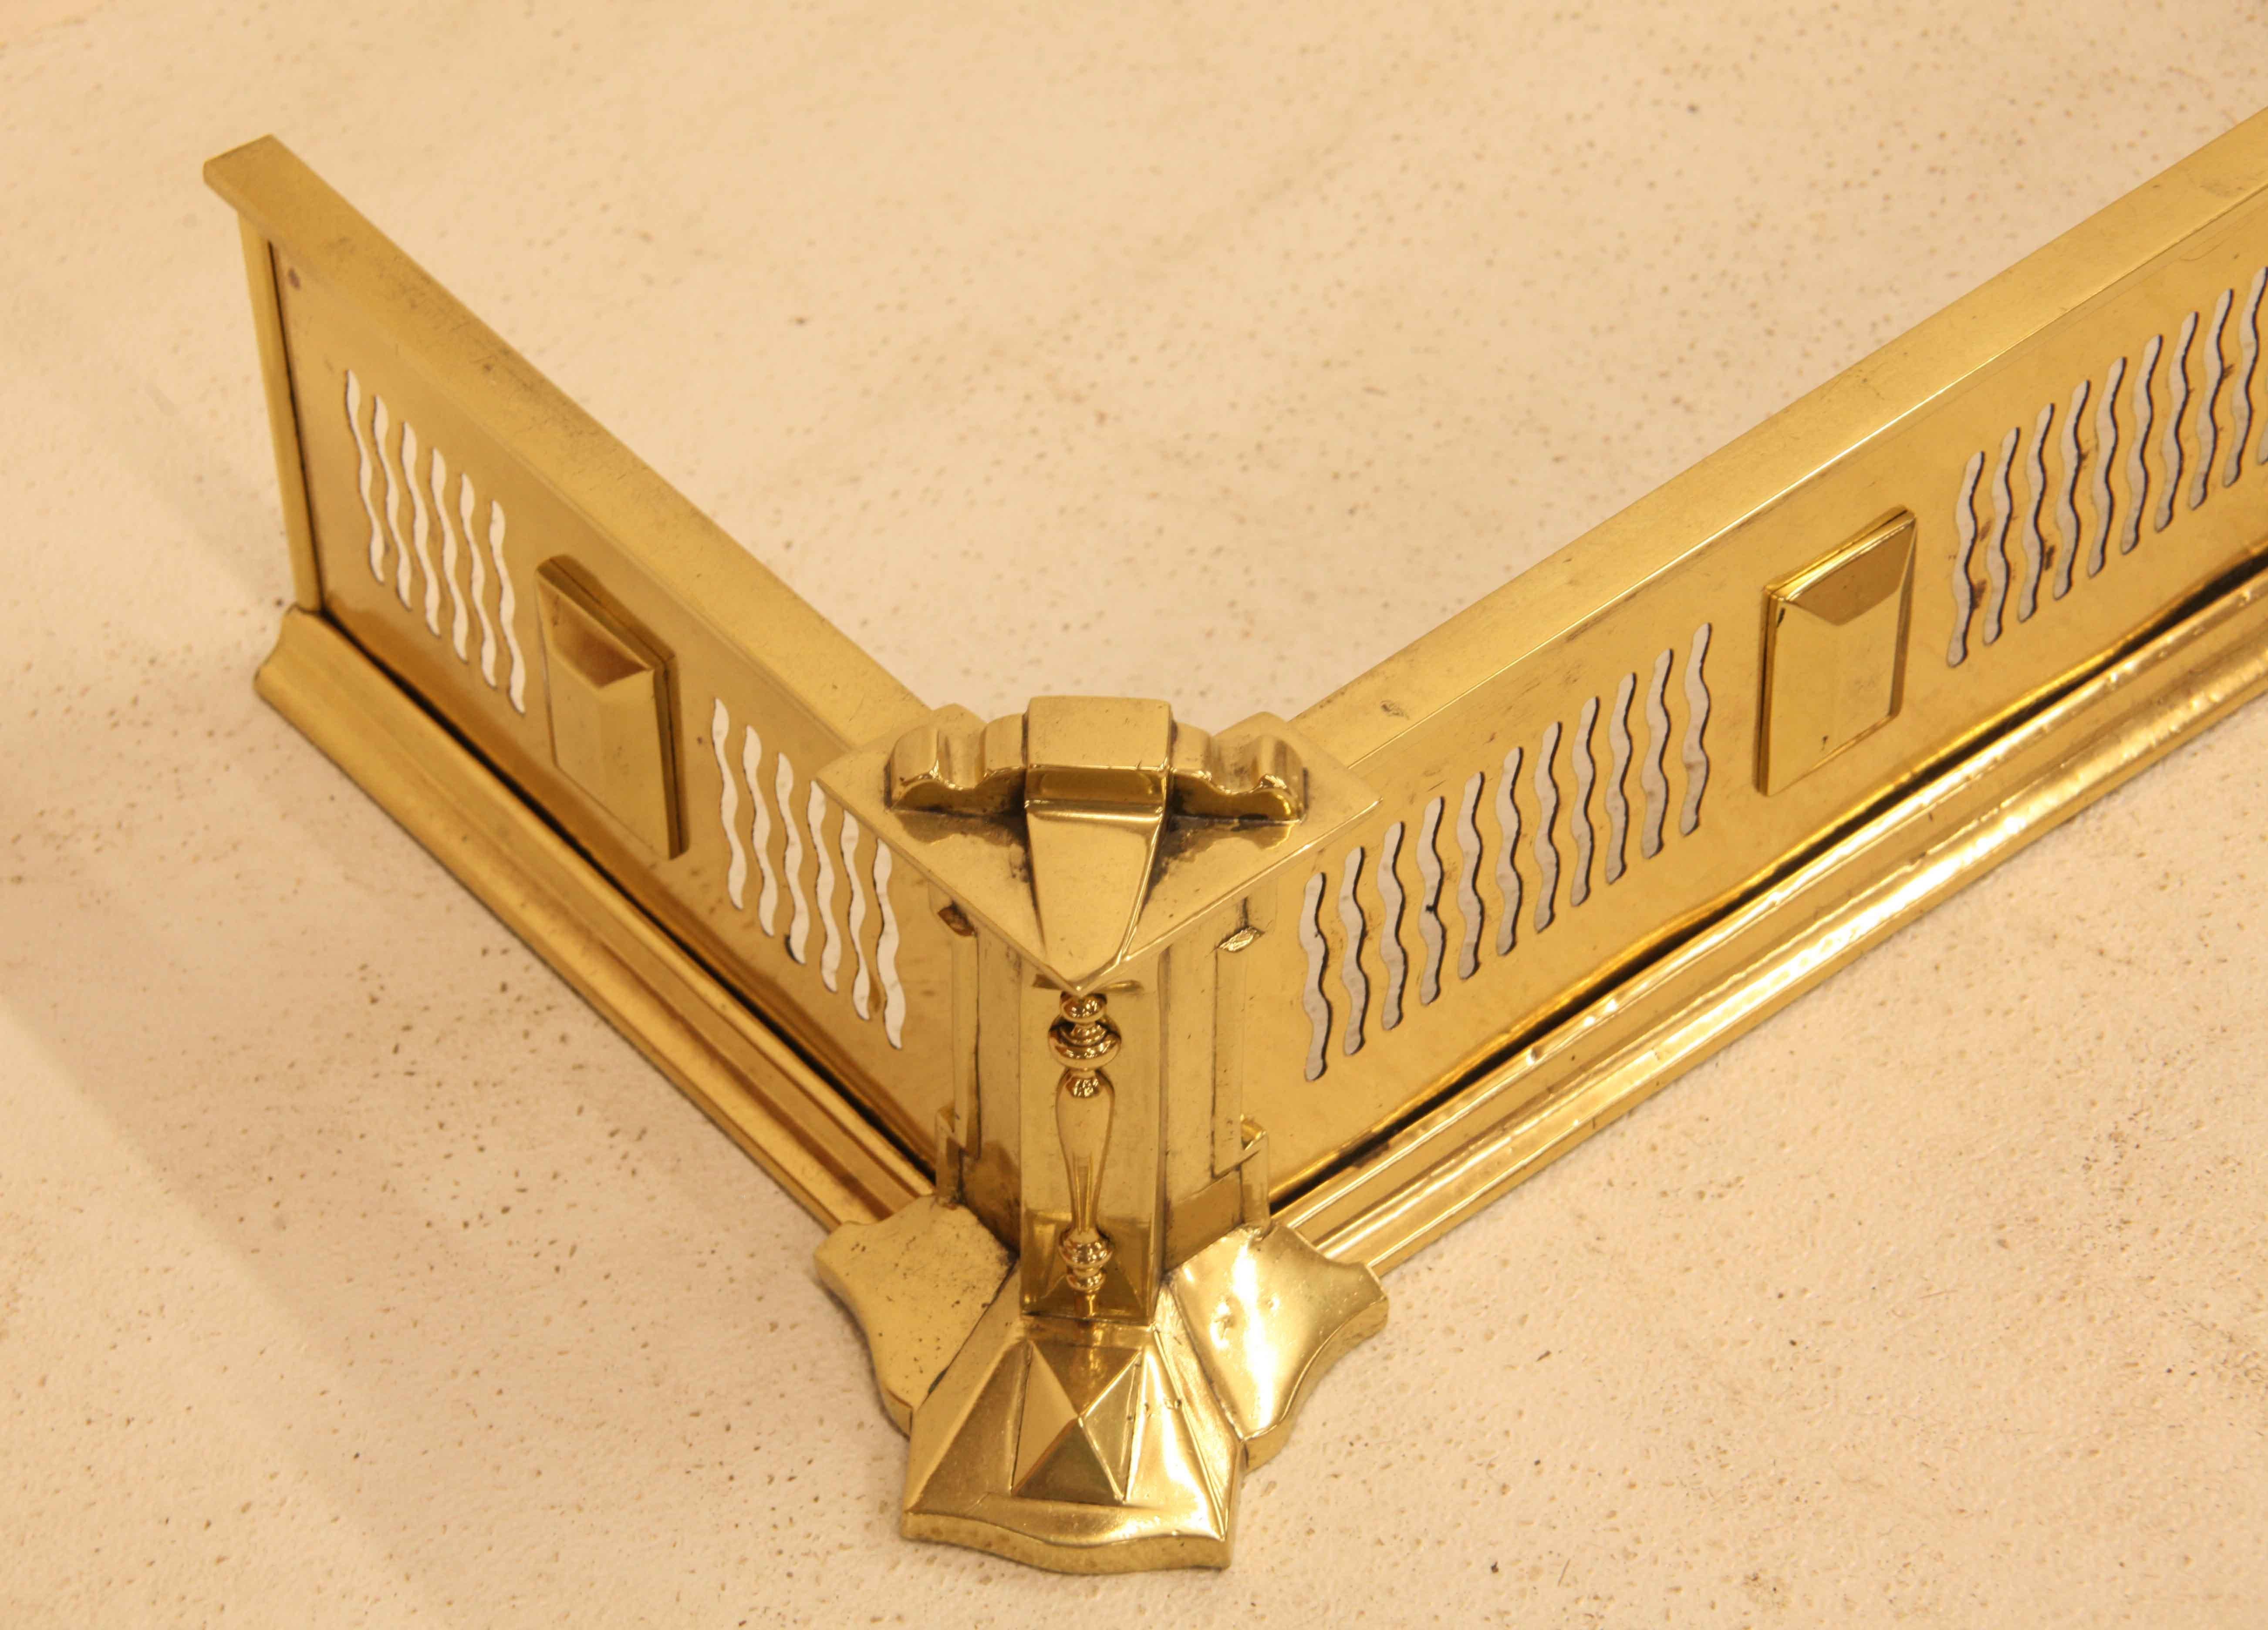 English brass fender,  with a repeating reticulated wavy pattern separated by applied raised blocks; canted corners with projecting molding and design.   The interior measurements are 48.25'' wide and 11.5'' deep.  